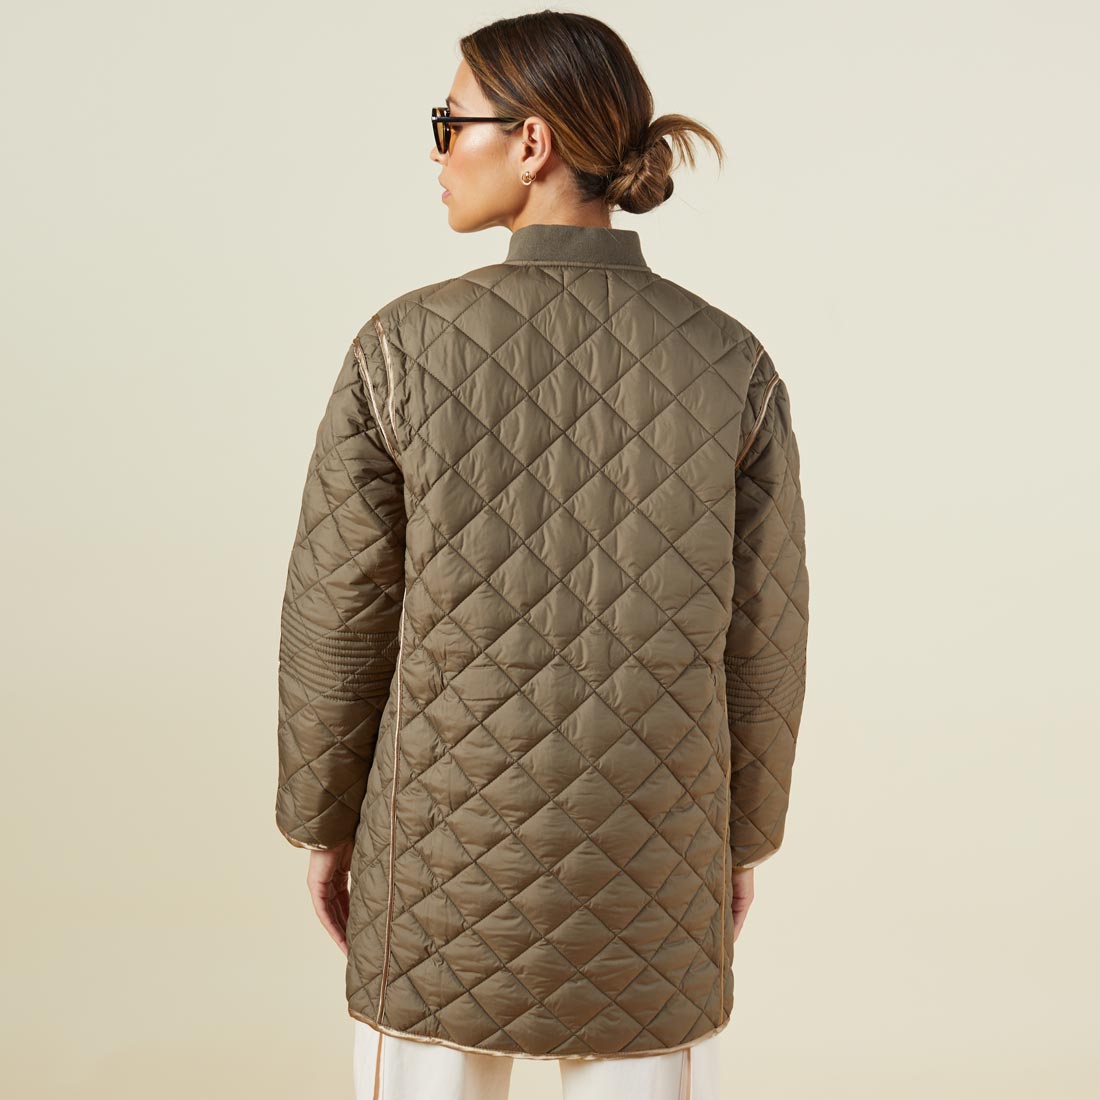 Back view of model wearing the quilted bomber in laurel green.